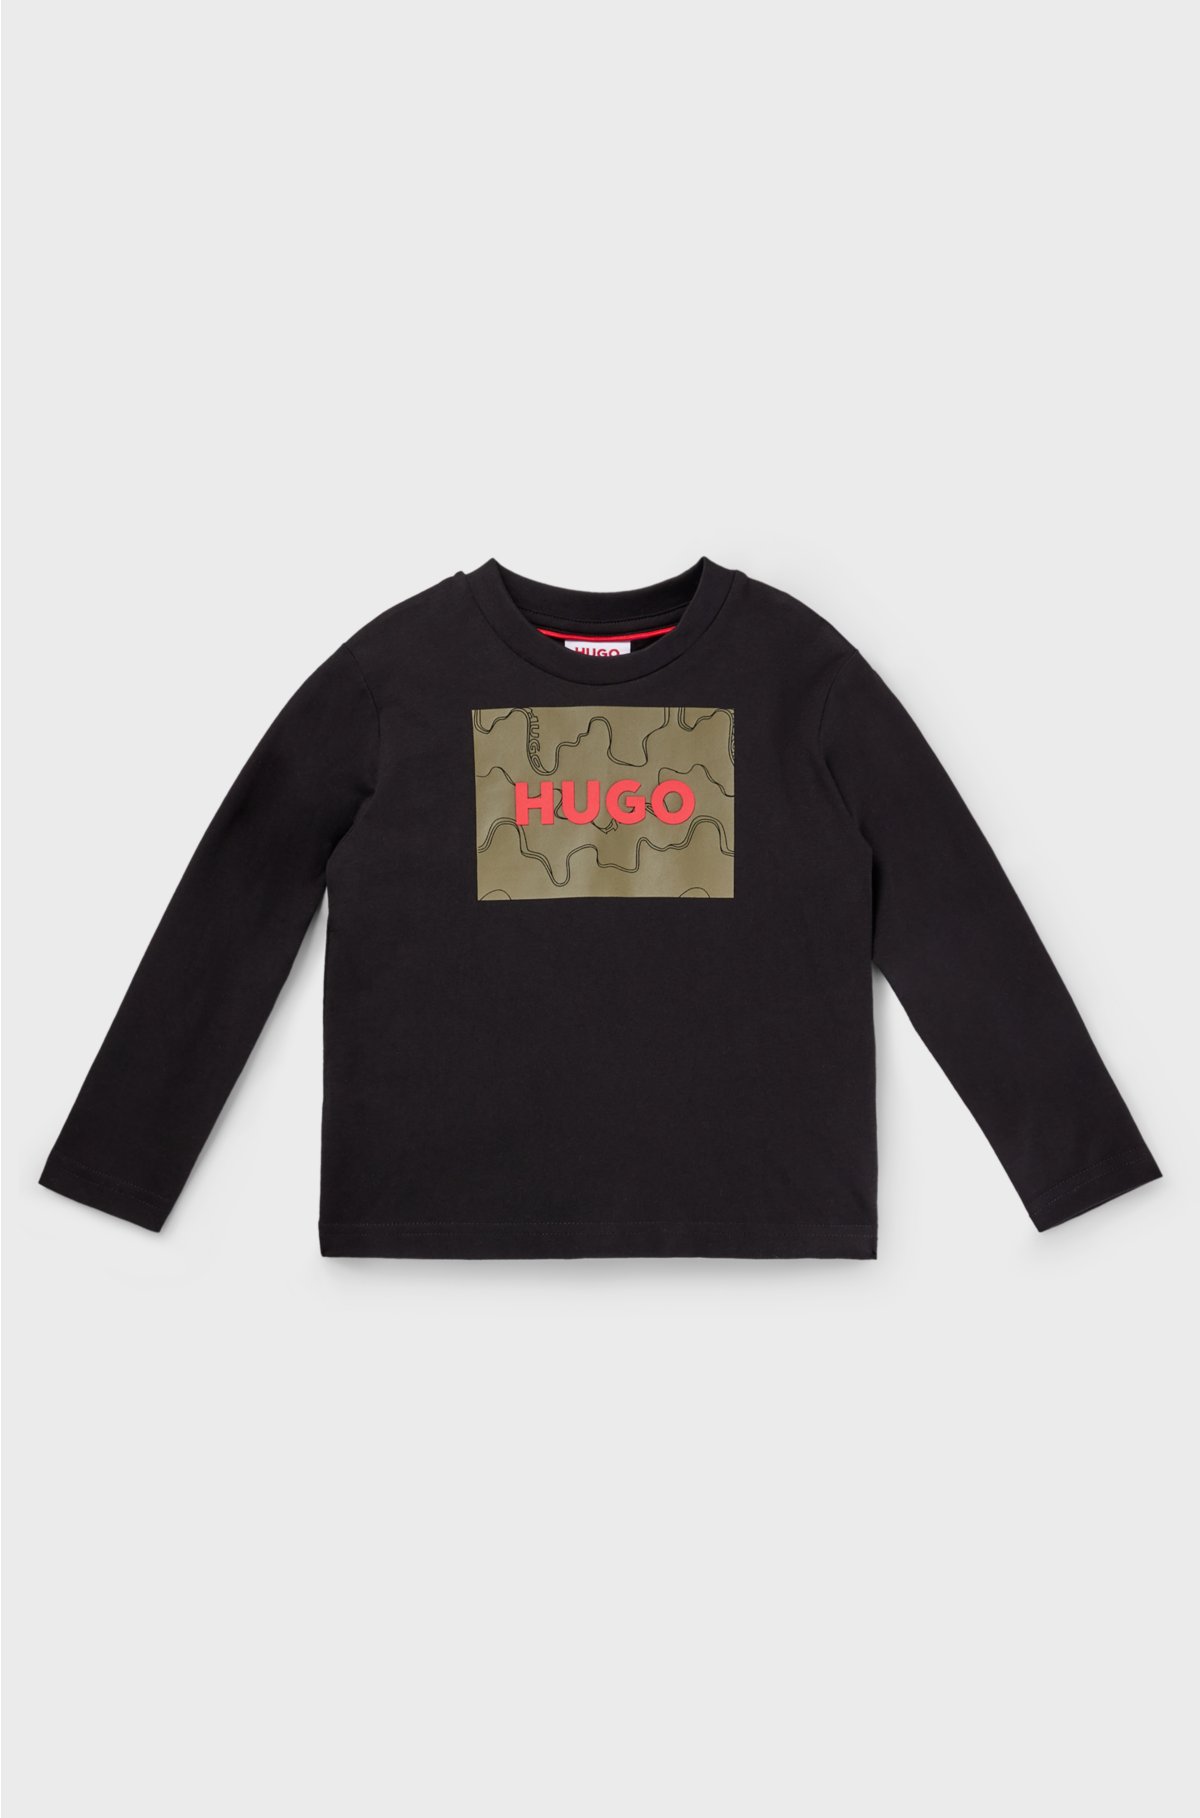 Kids' long-sleeved cotton T-shirt with textured framed logo, Black